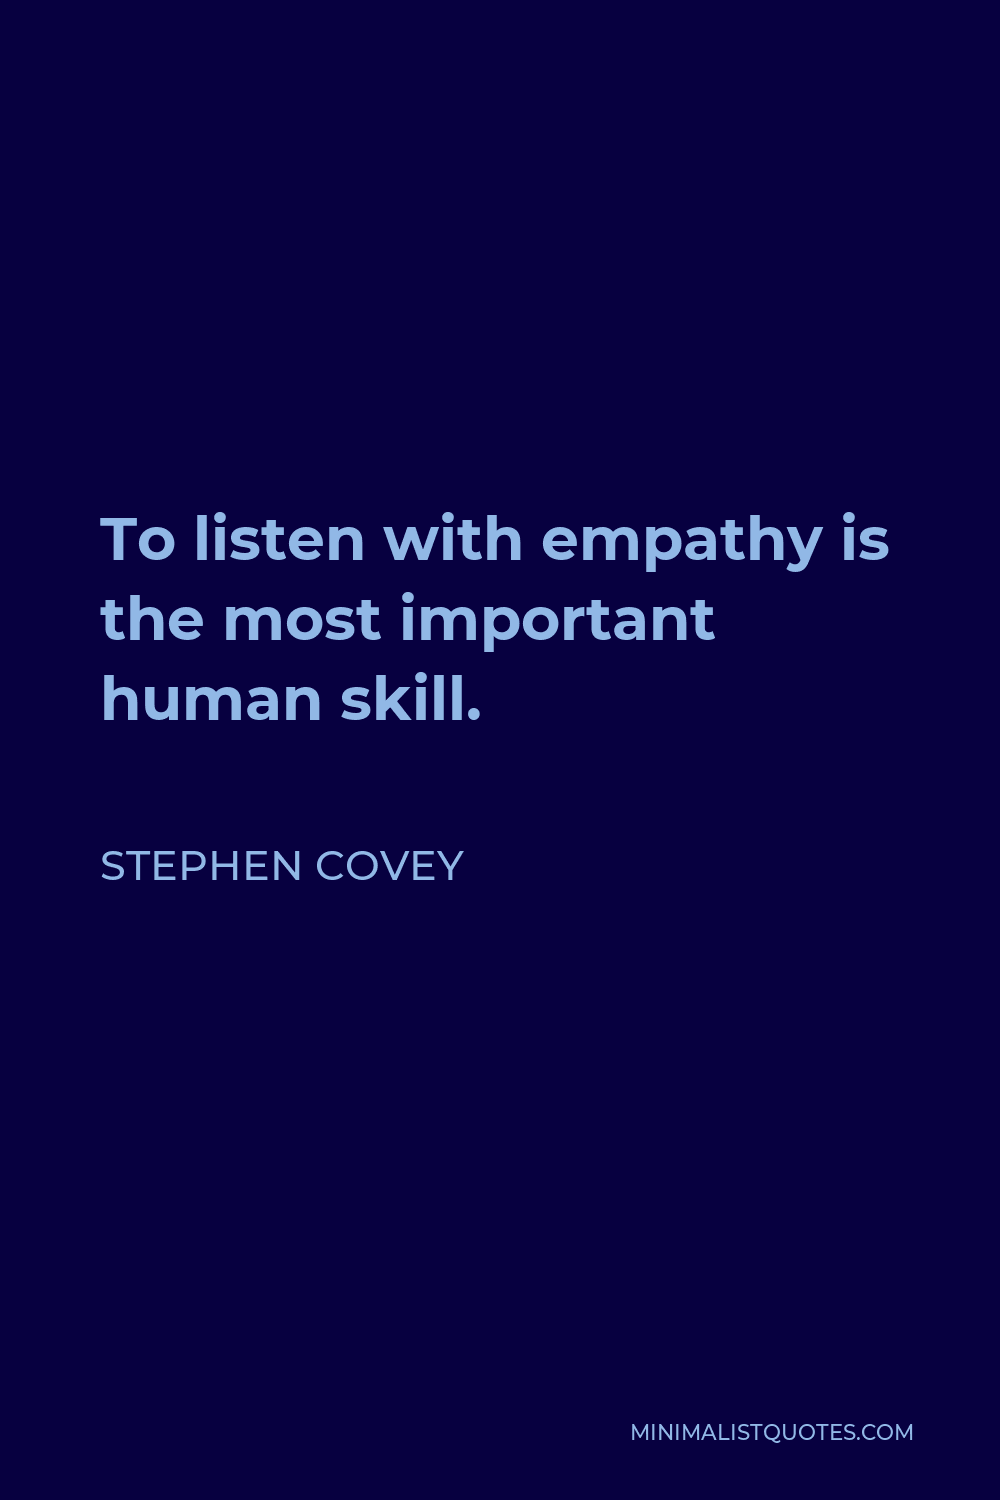 Stephen Covey Quote - To listen with empathy is the most important human skill.